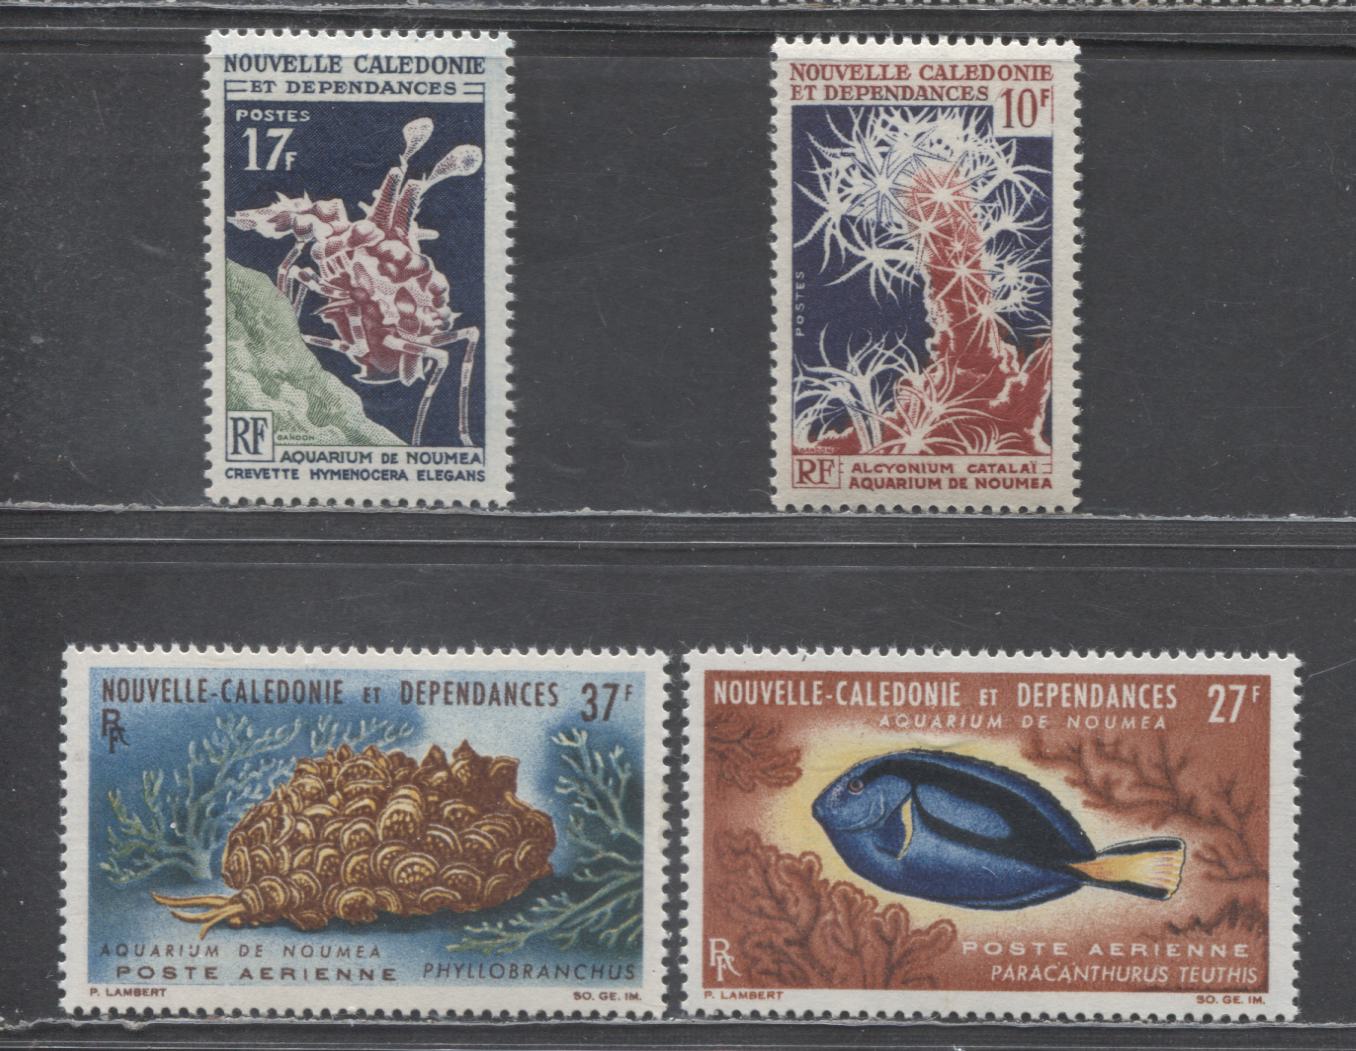 Lot 117 New Caledonia SC#339/C37 1964-1965 Sea Squirts - Airmail Issues, 4 VFNH & OG Singles, Click on Listing to See ALL Pictures, 2017 Scott Cat. $24